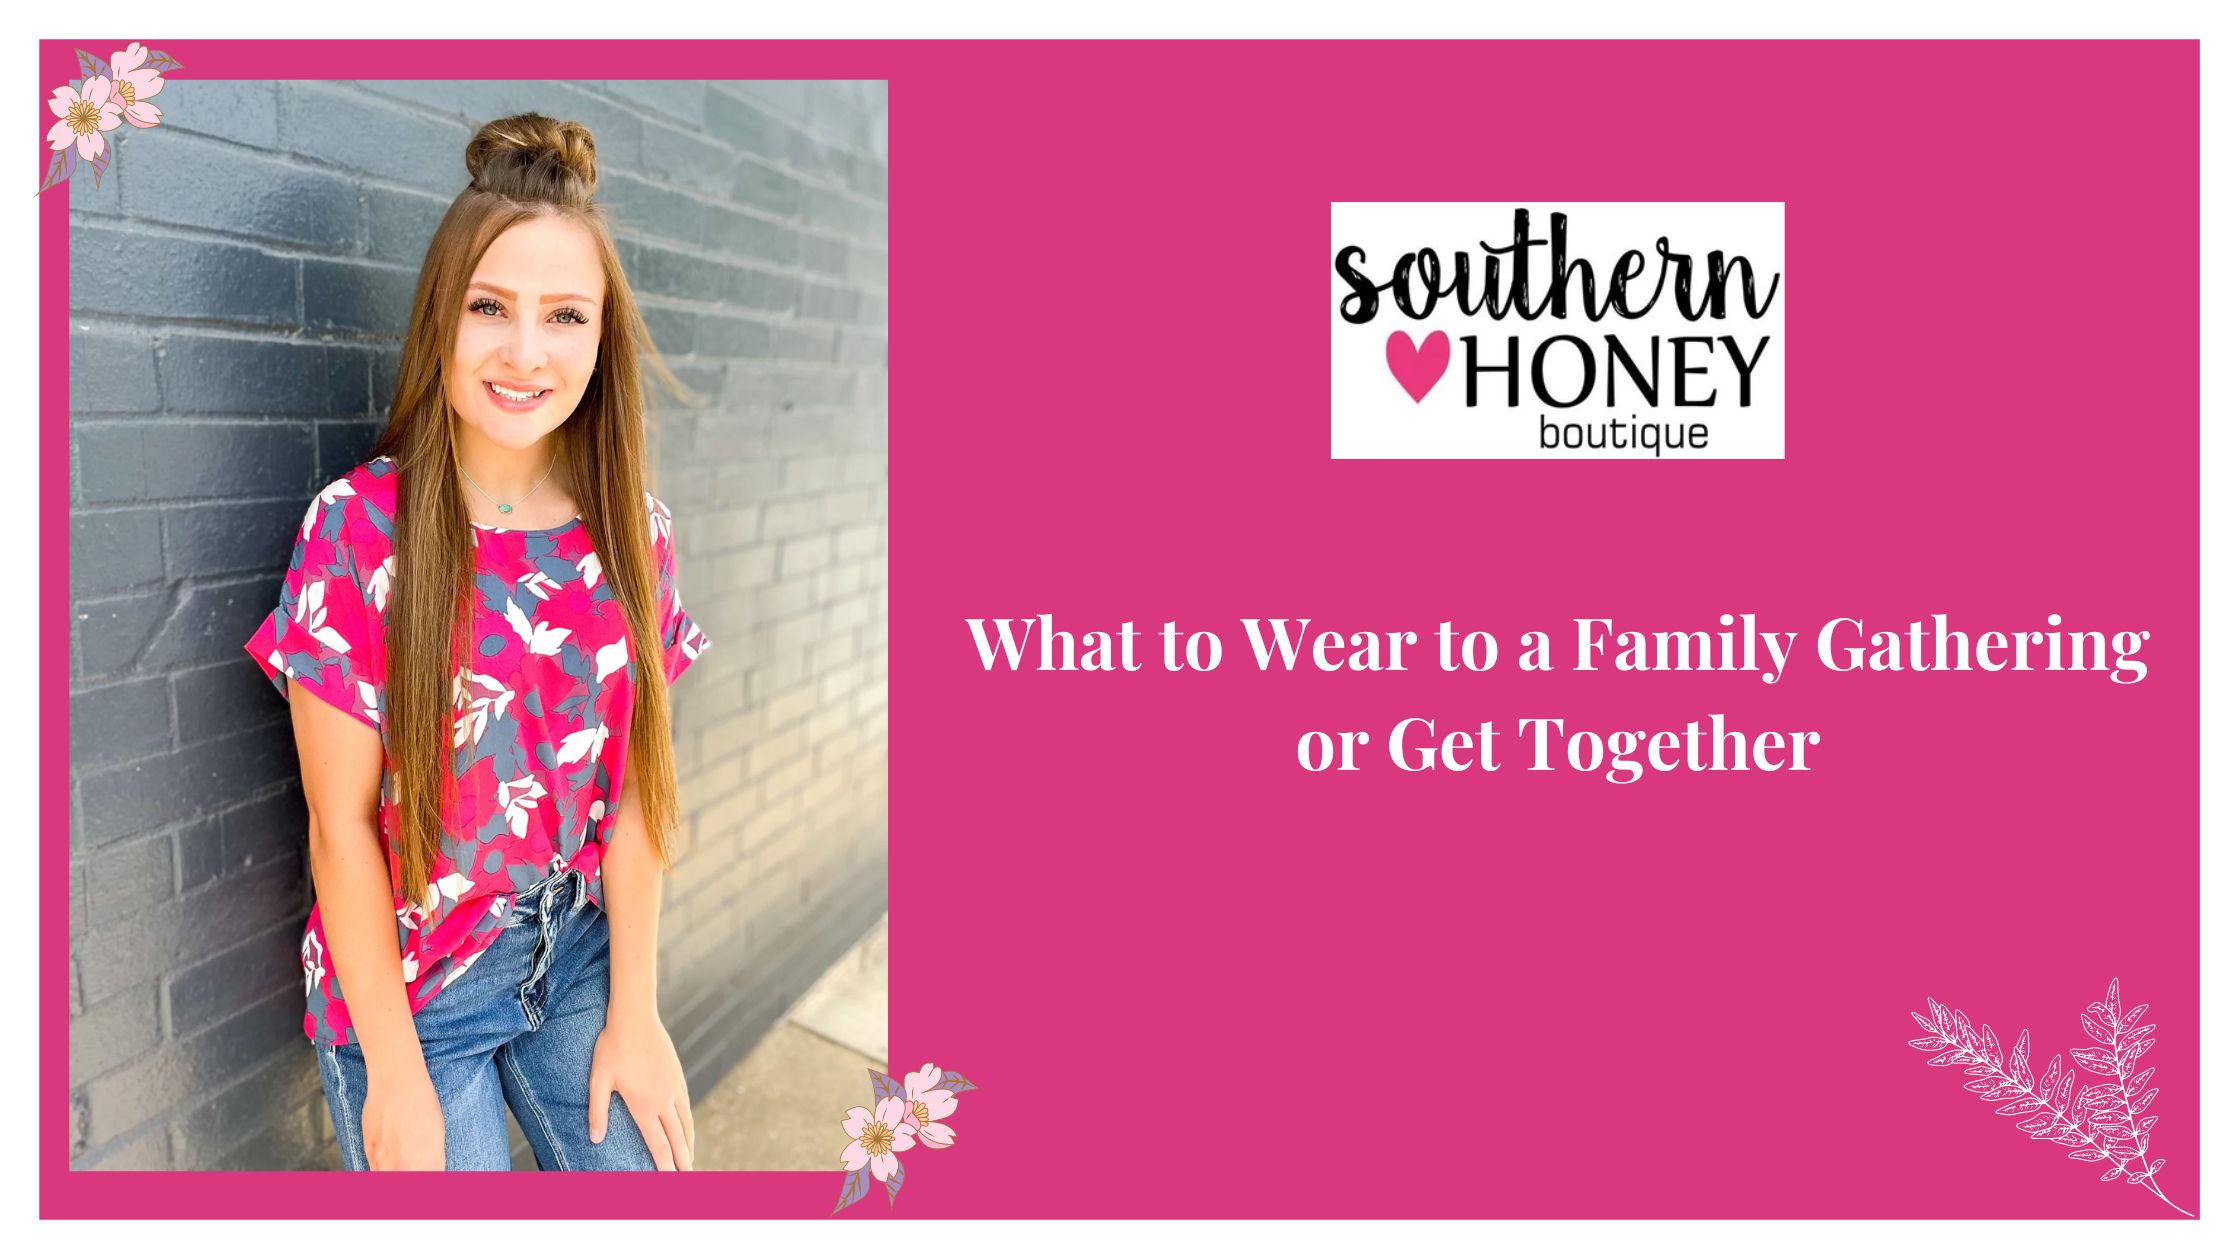 What to Wear to a Family Gathering or Get Together